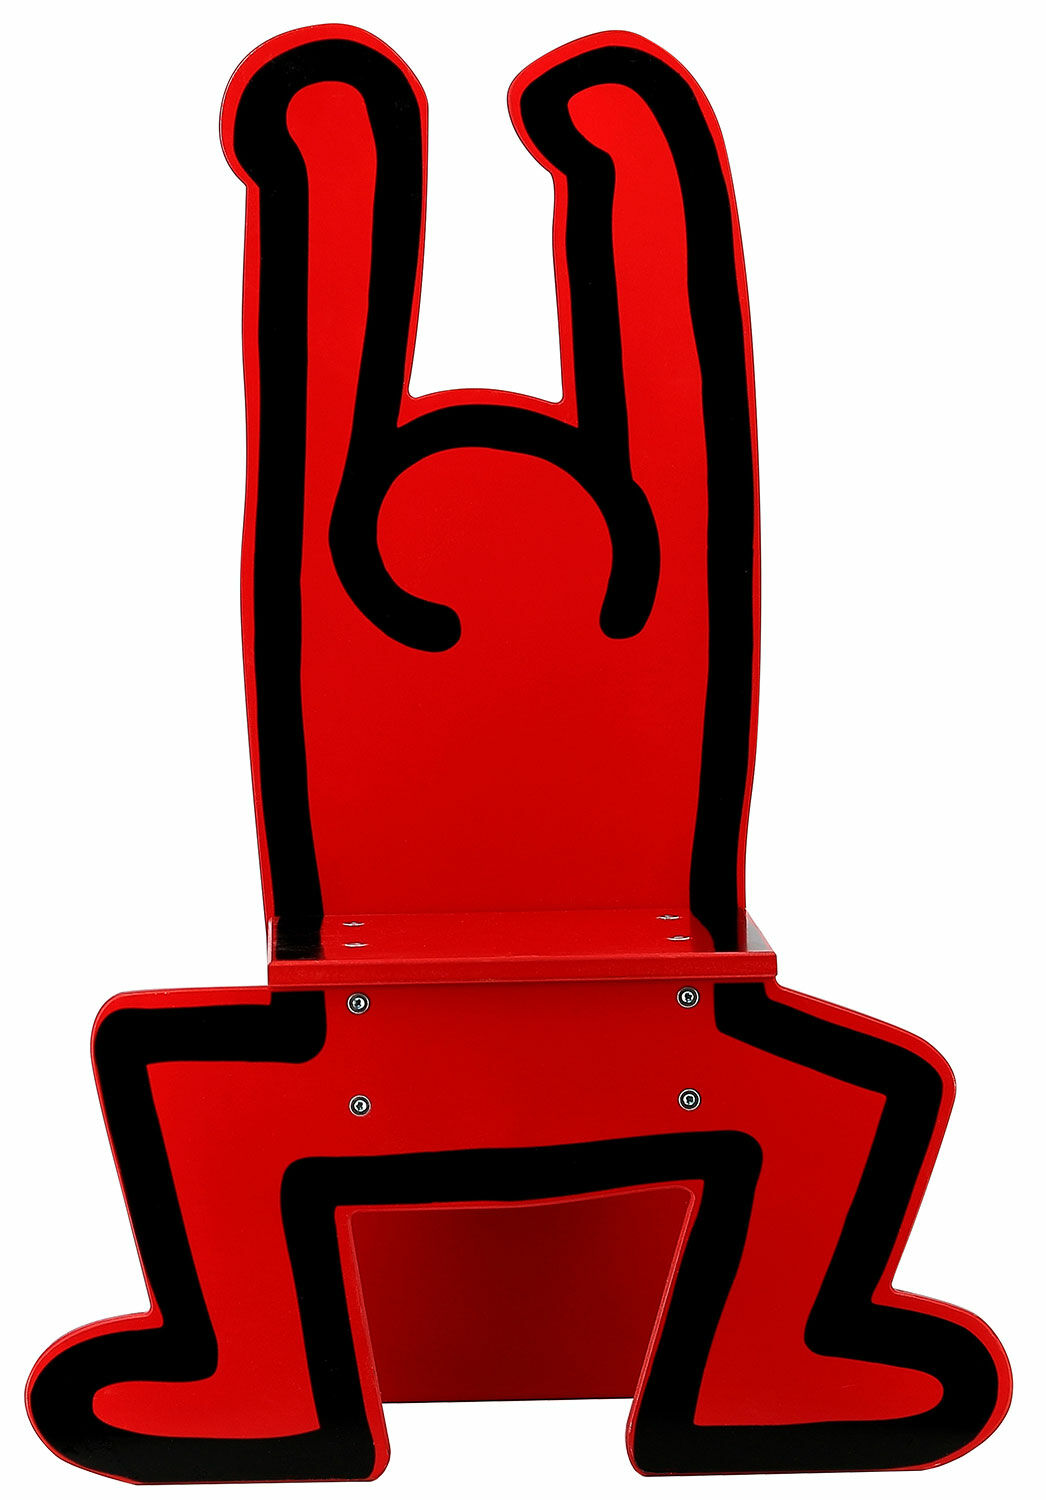 Children's chair "Keith Haring", red version